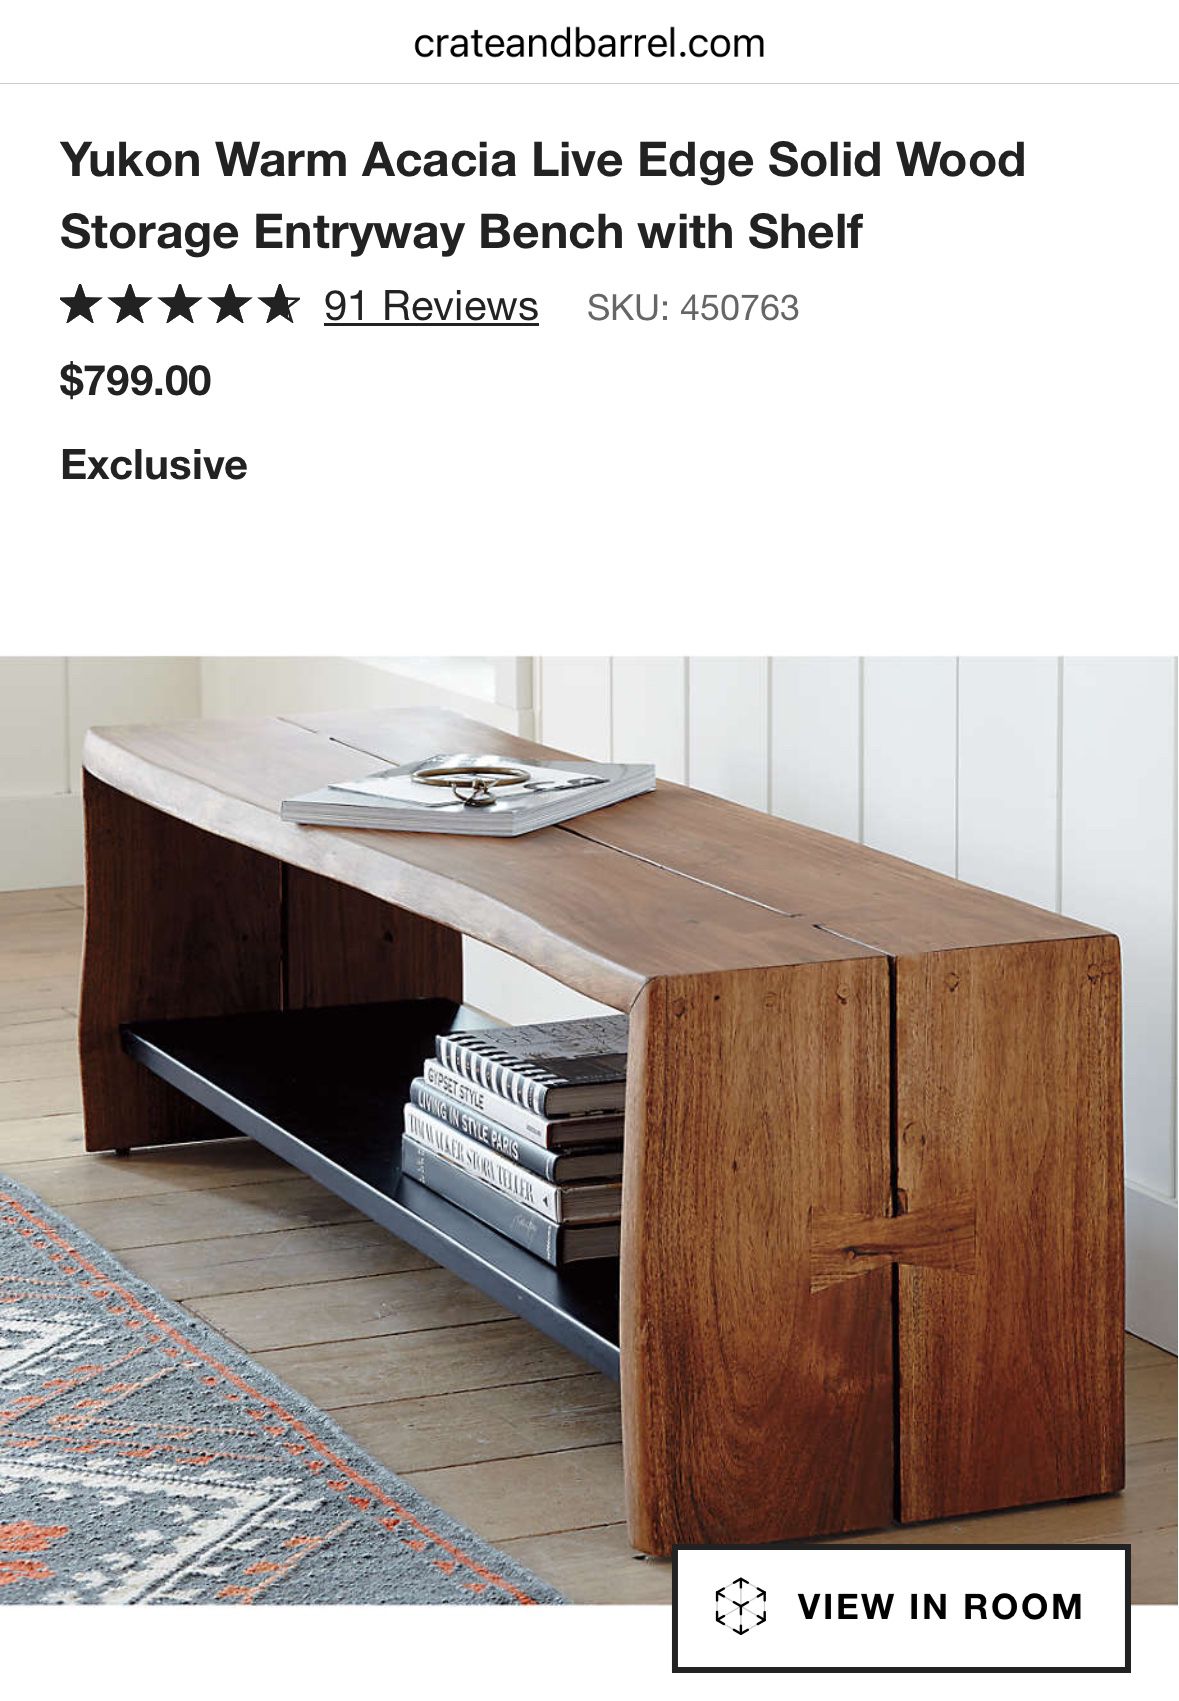 Crate And Barrel Yukon Warm Acacia Live Edge Solid Wood Storage Entryway Bench with Shelf